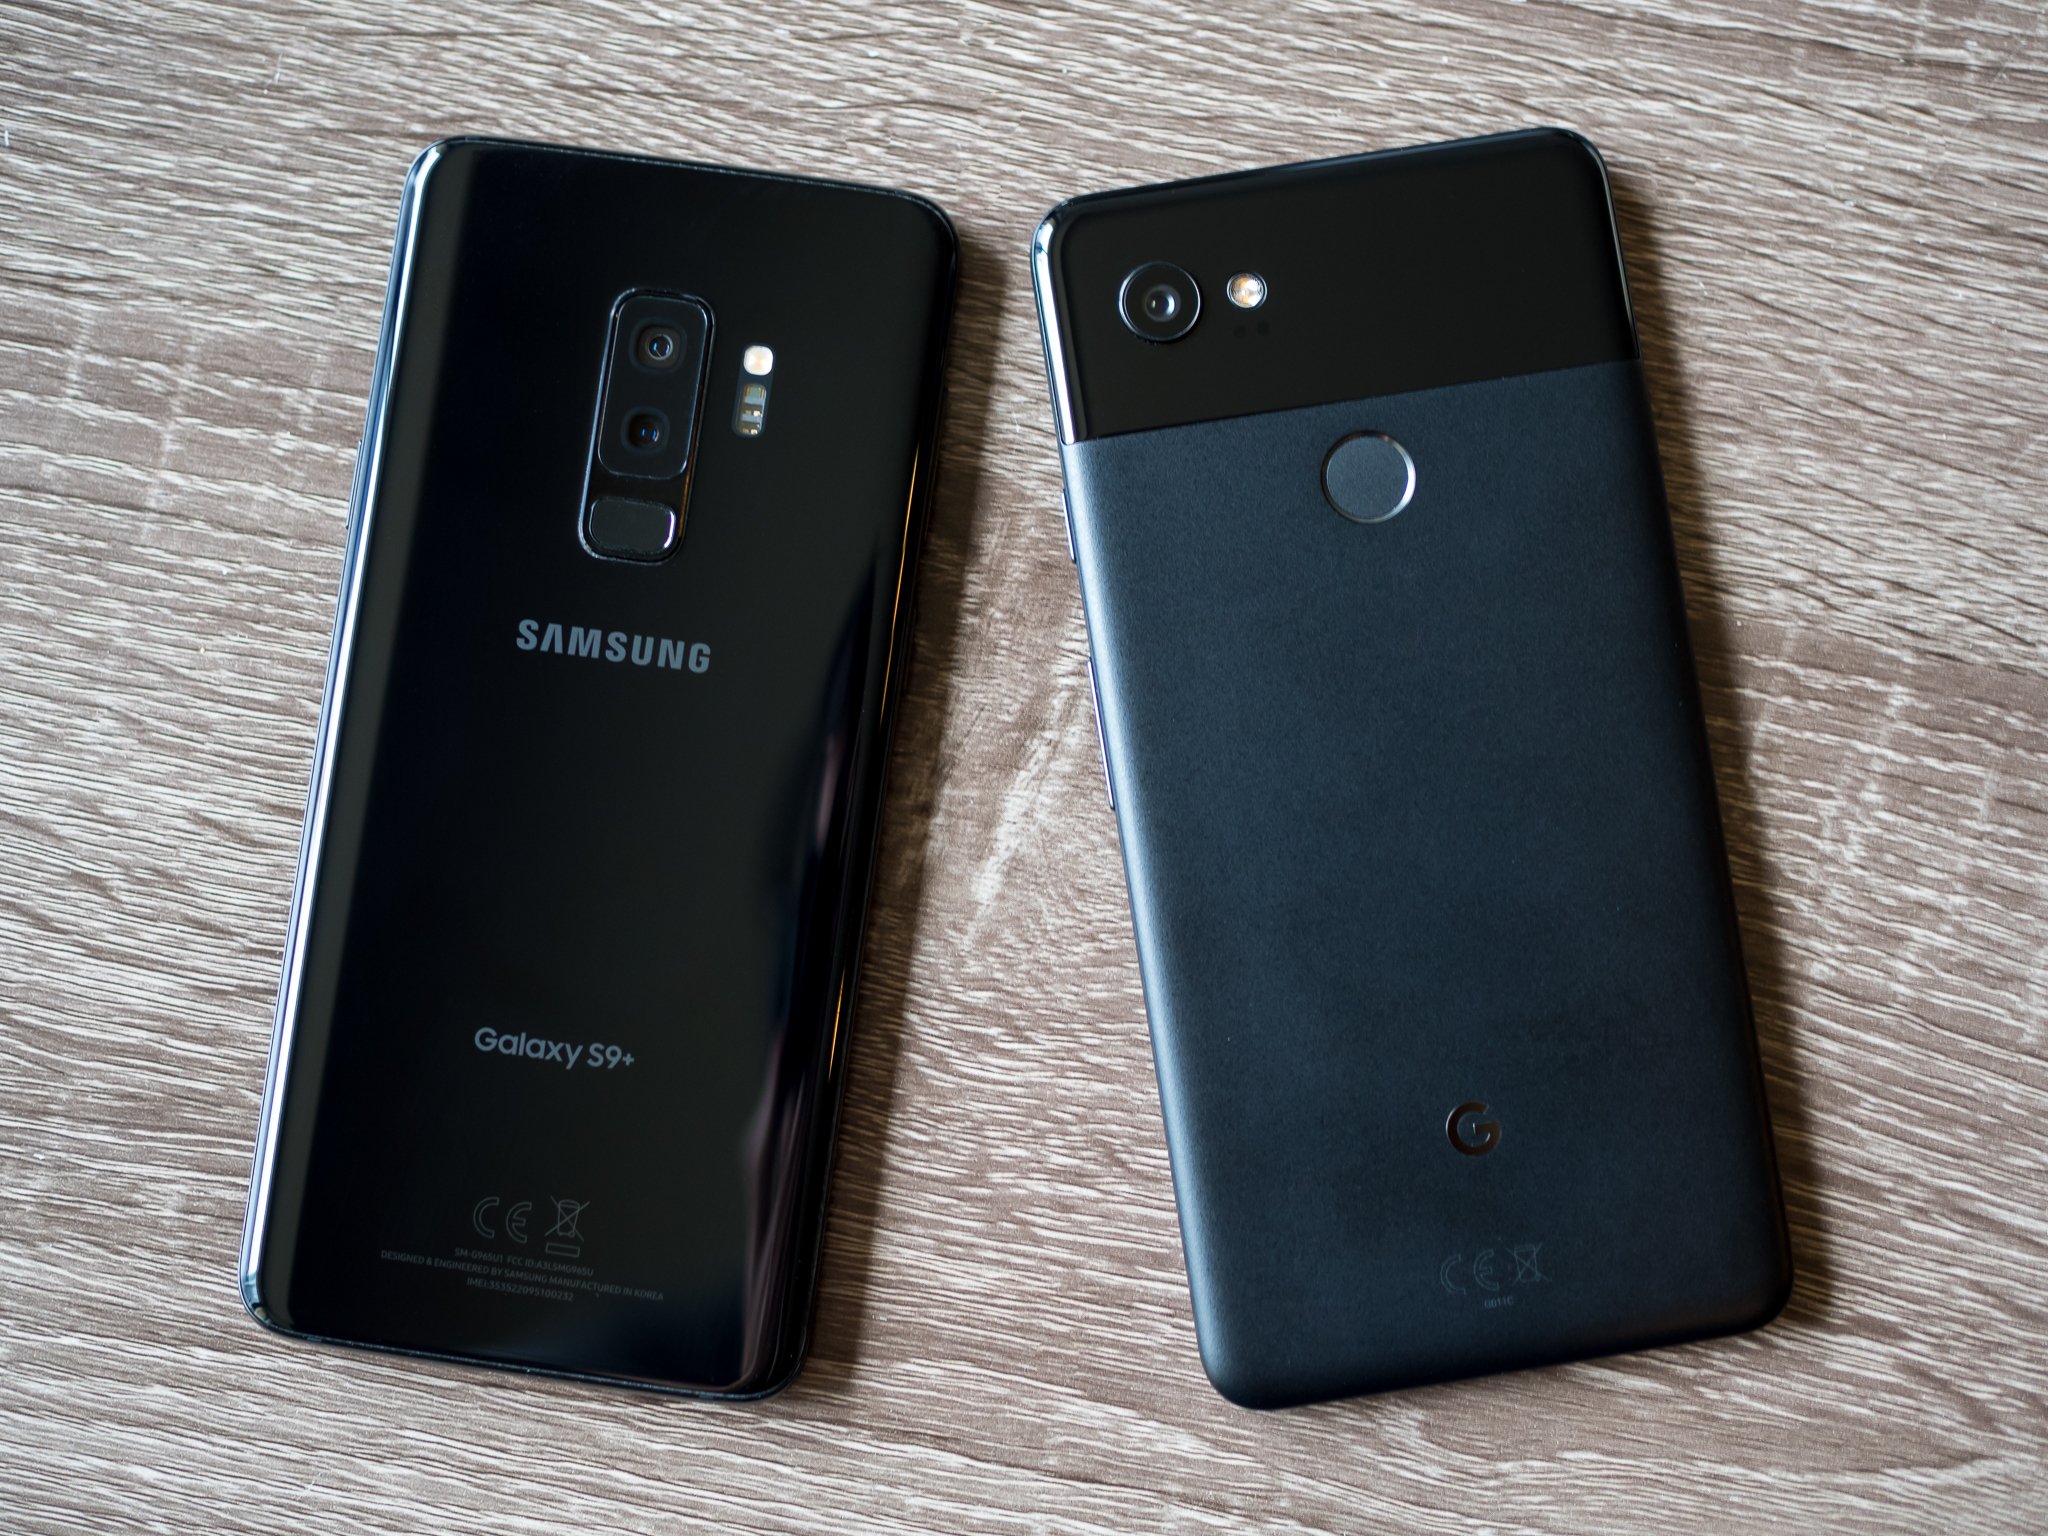 Deal Verizon Is Offering 50 Off The Pixel 2 And Samsung Galaxy S9